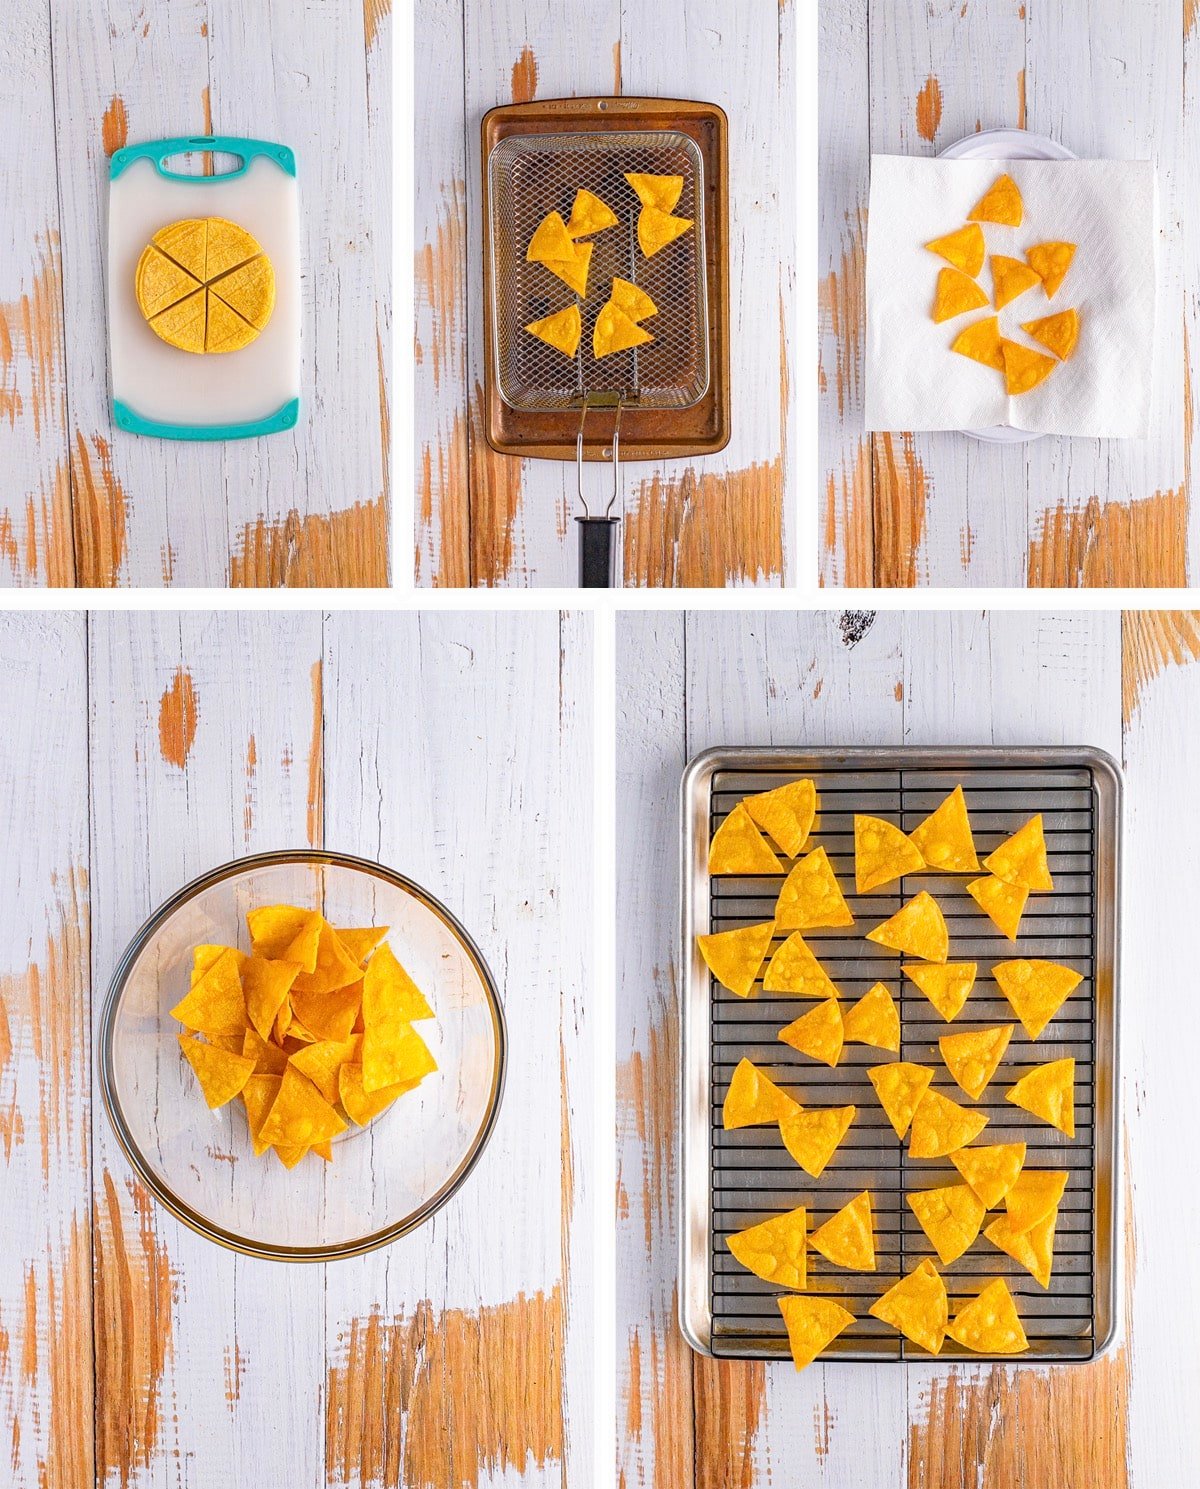 Overhead collage of images showing how to make homemade fried tortilla chips